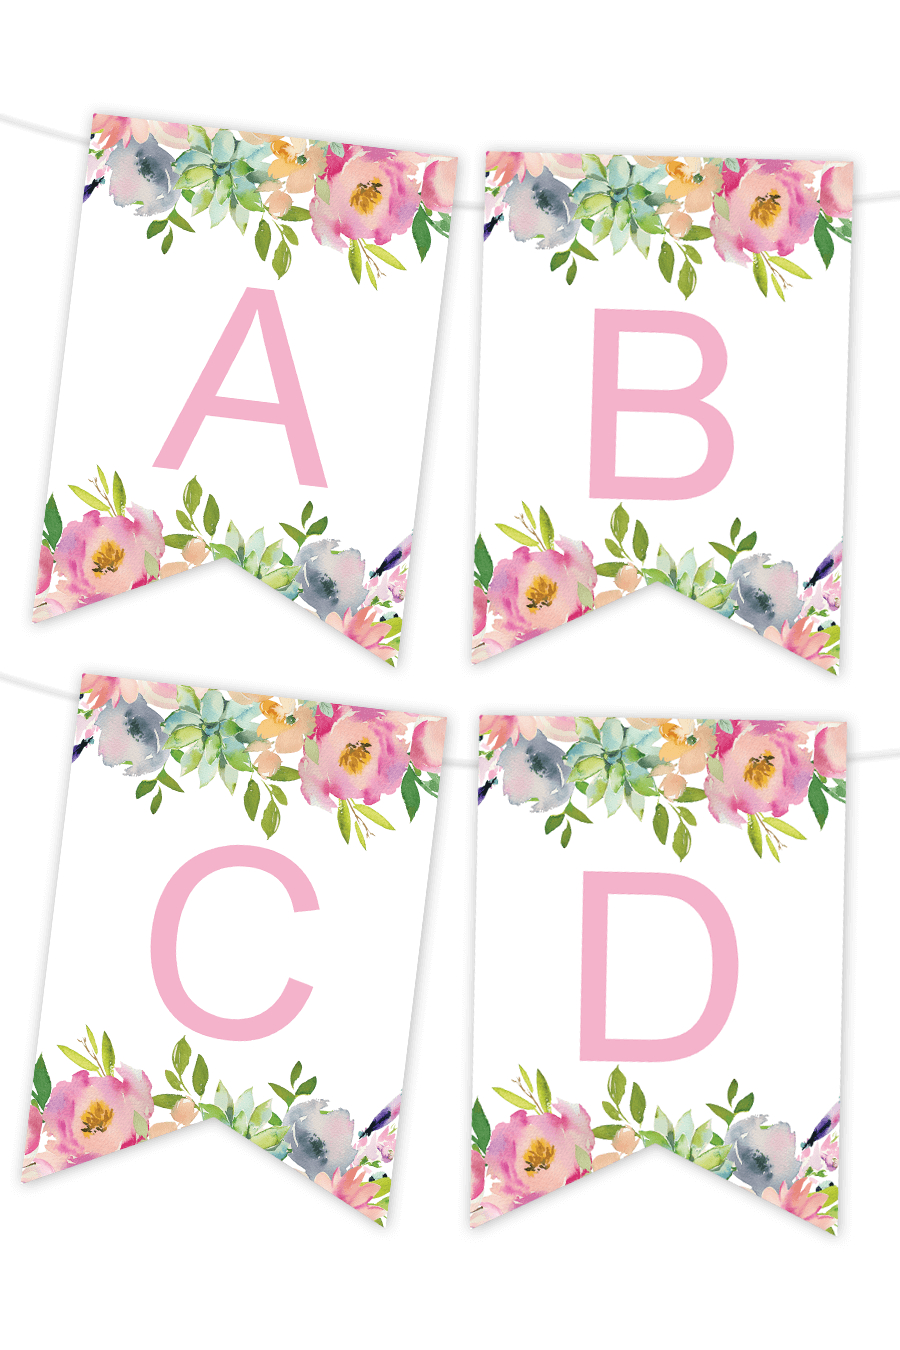 Impertinent Free Printable Banner Templates | Kenzi's Blog With Regard To Free Bridal Shower Banner Template